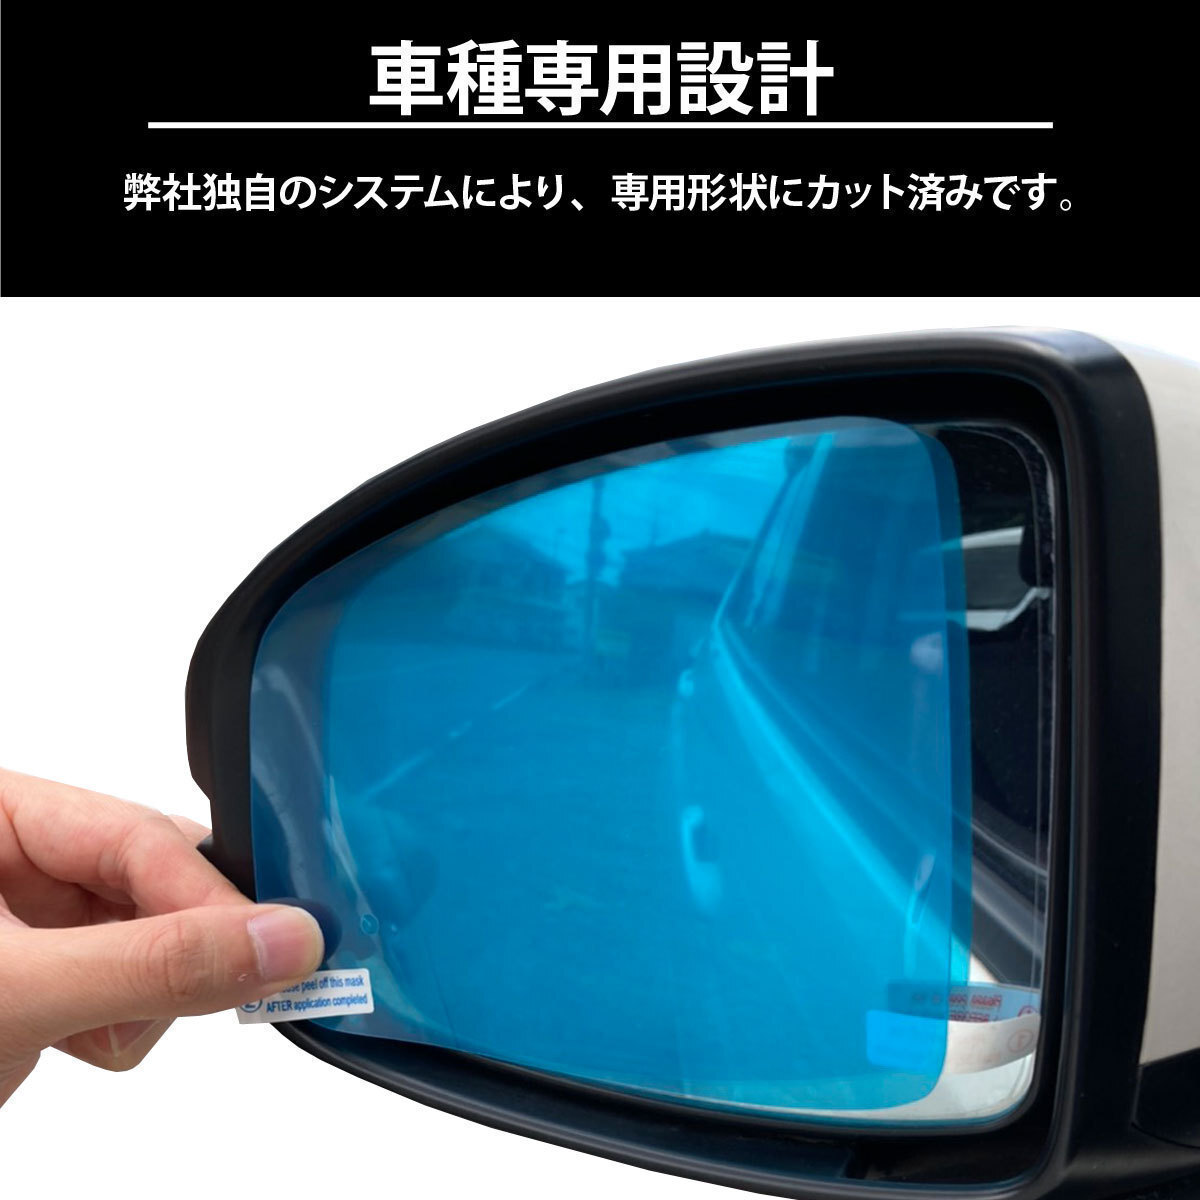  car make exclusive use Benz W210 for latter term left steering wheel car exclusive use water-repellent door mirror film left right set water-repellent effect 6 months shipping deadline 18 hour 